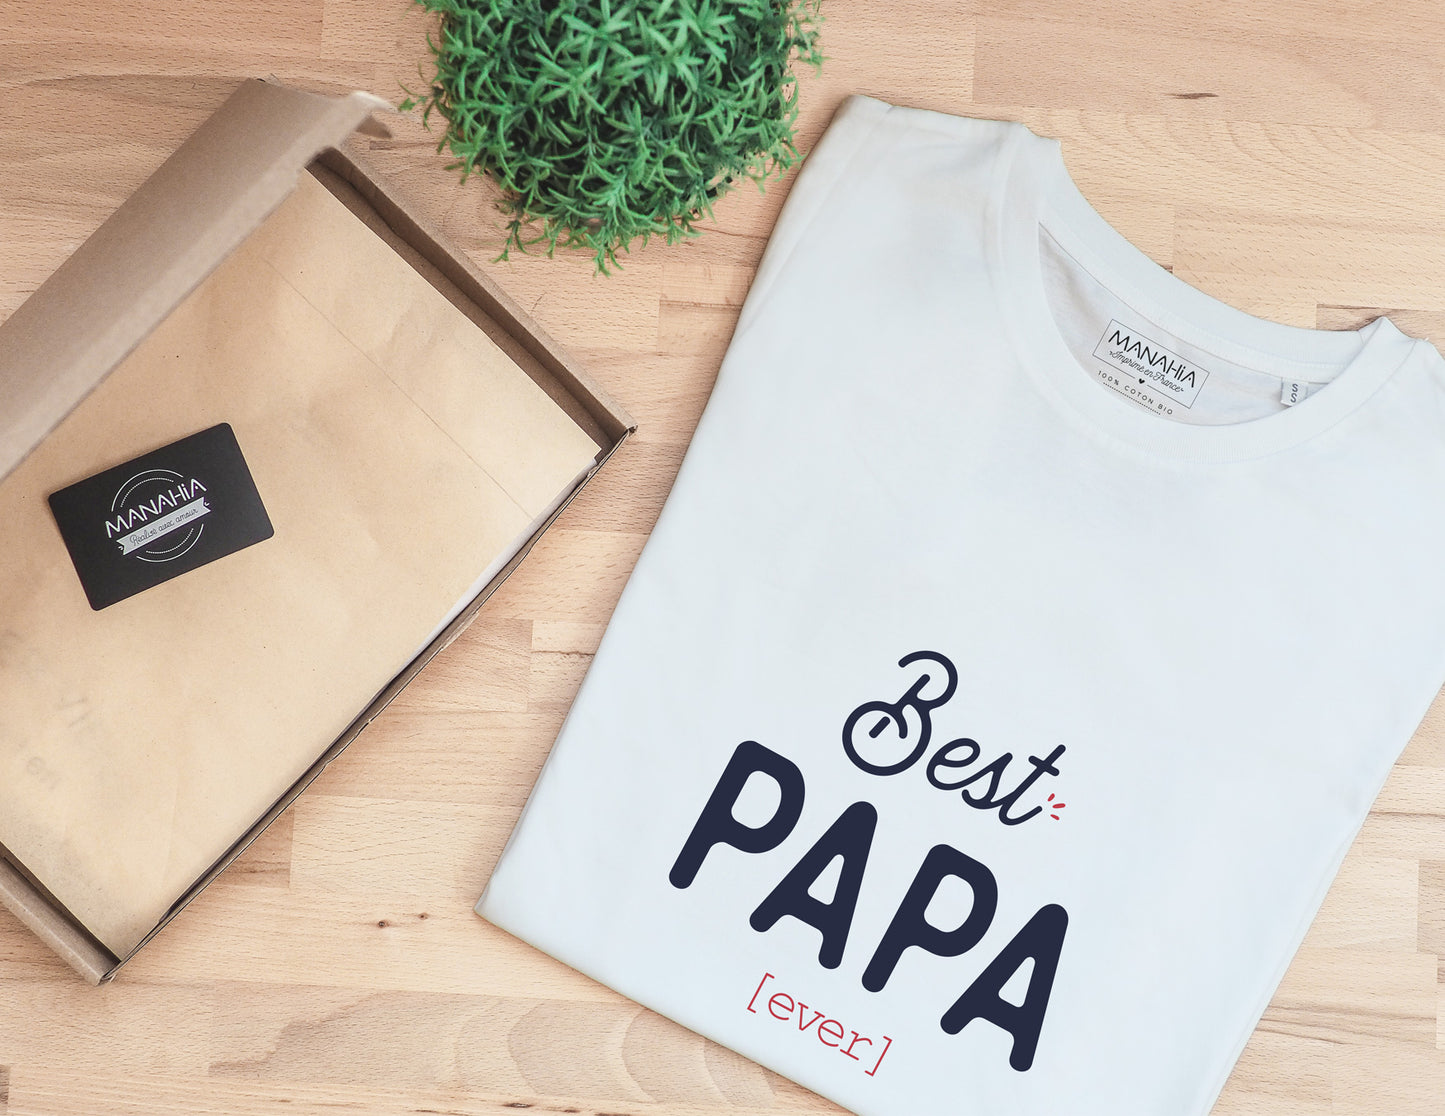 Tshirt homme - papa Best papa ever